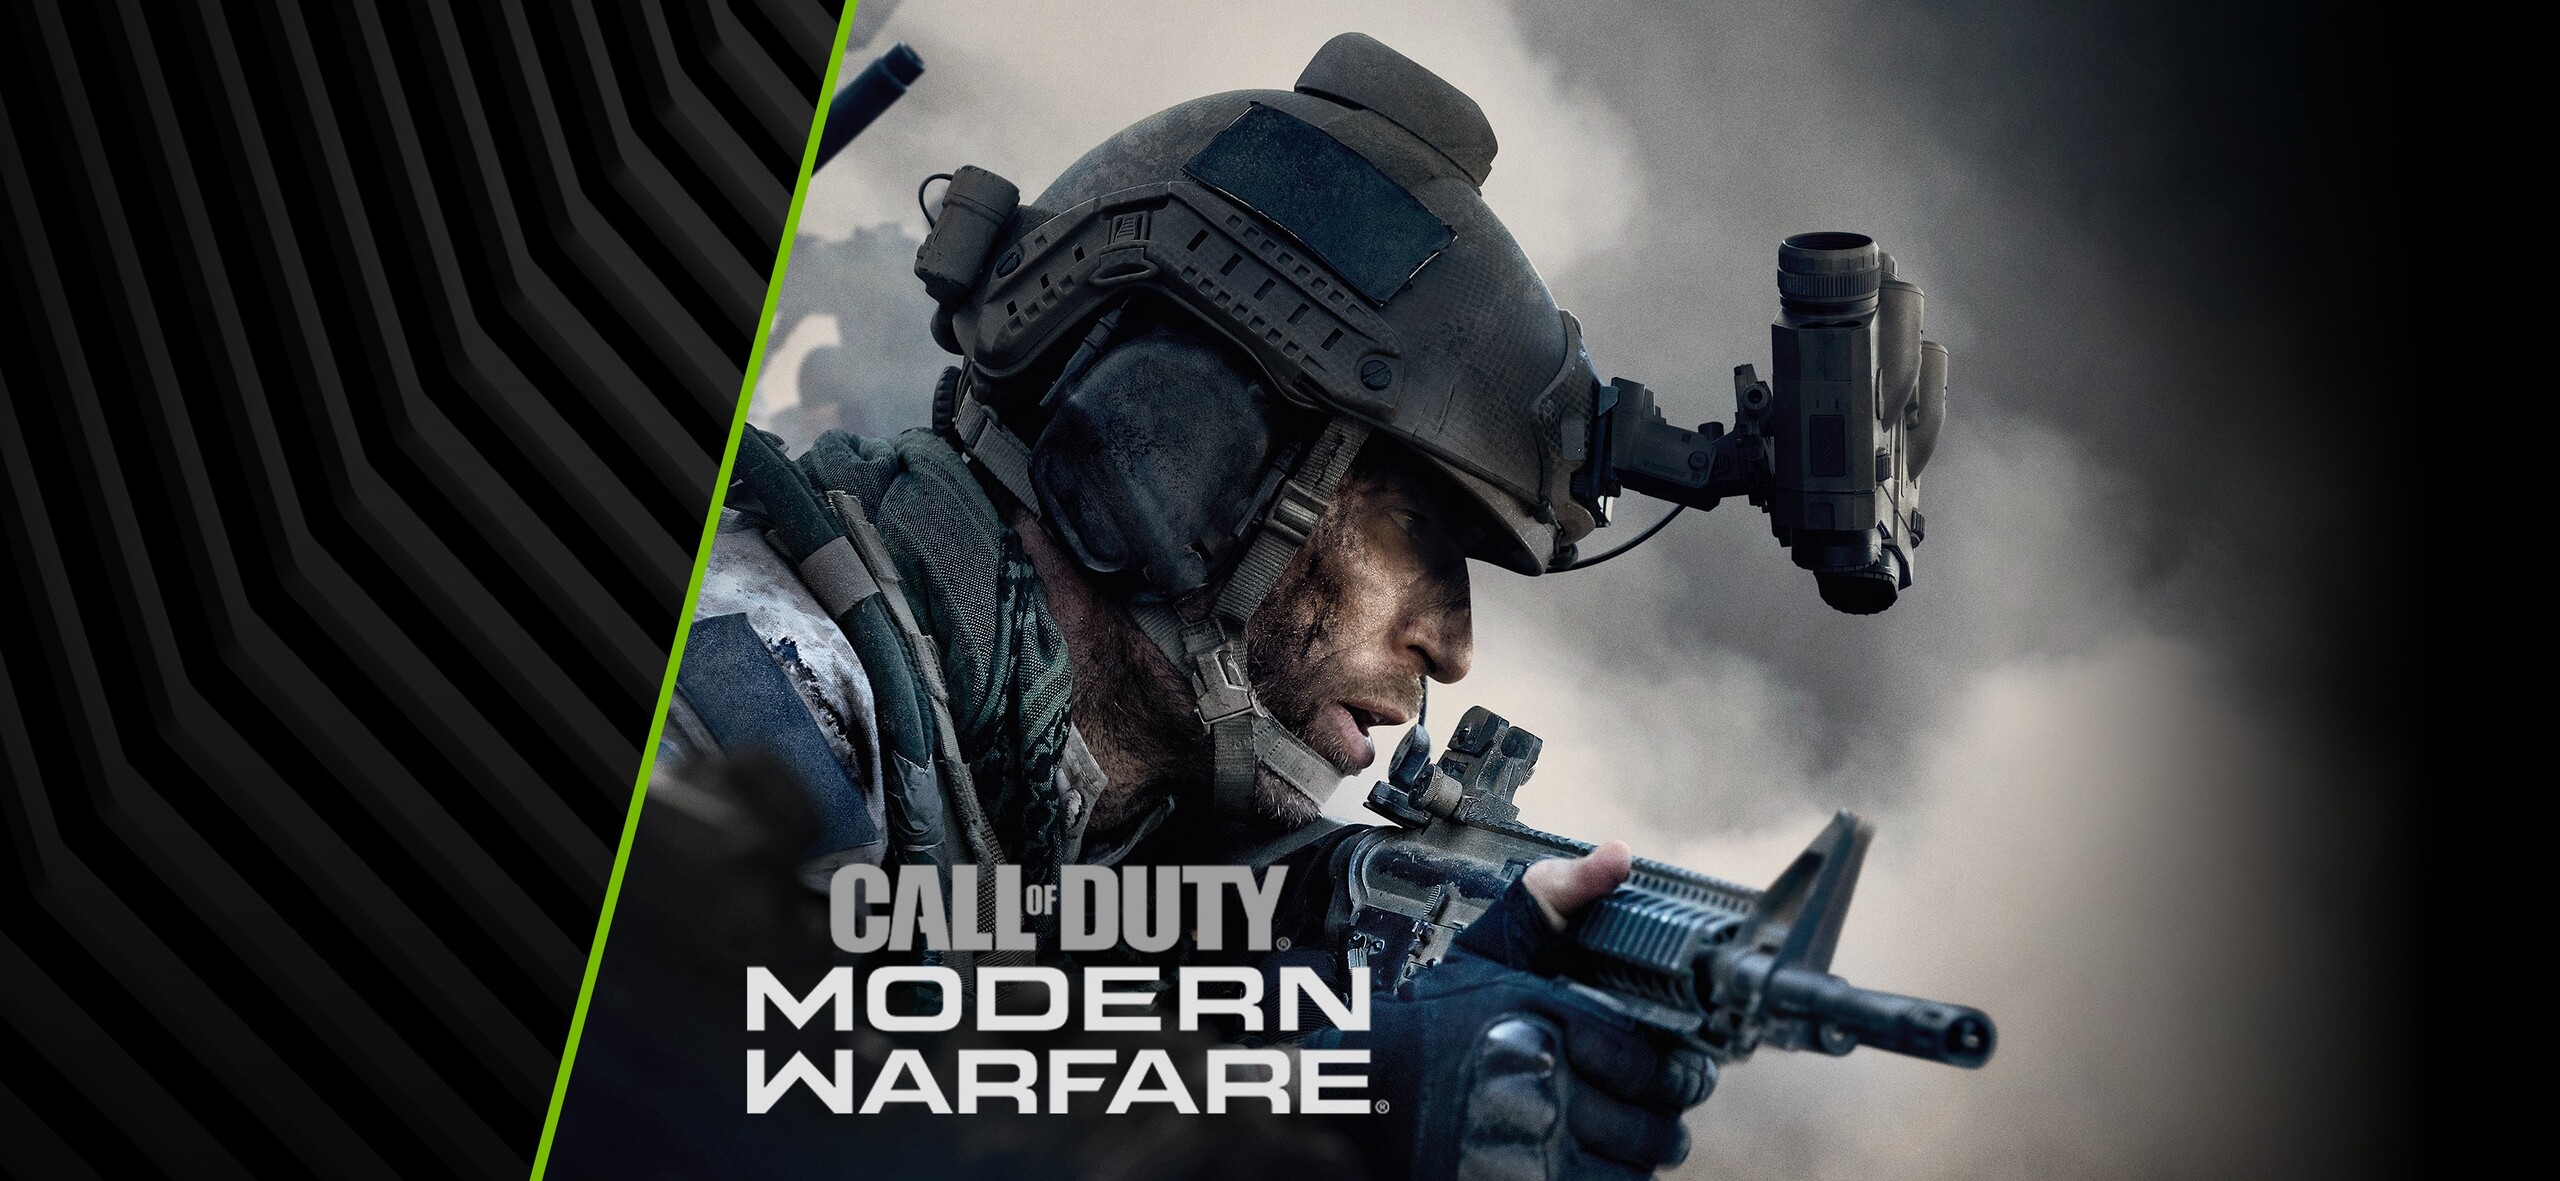 The chance to bundle Call of Duty Modern Warfare with a new RTX card will be gone soon